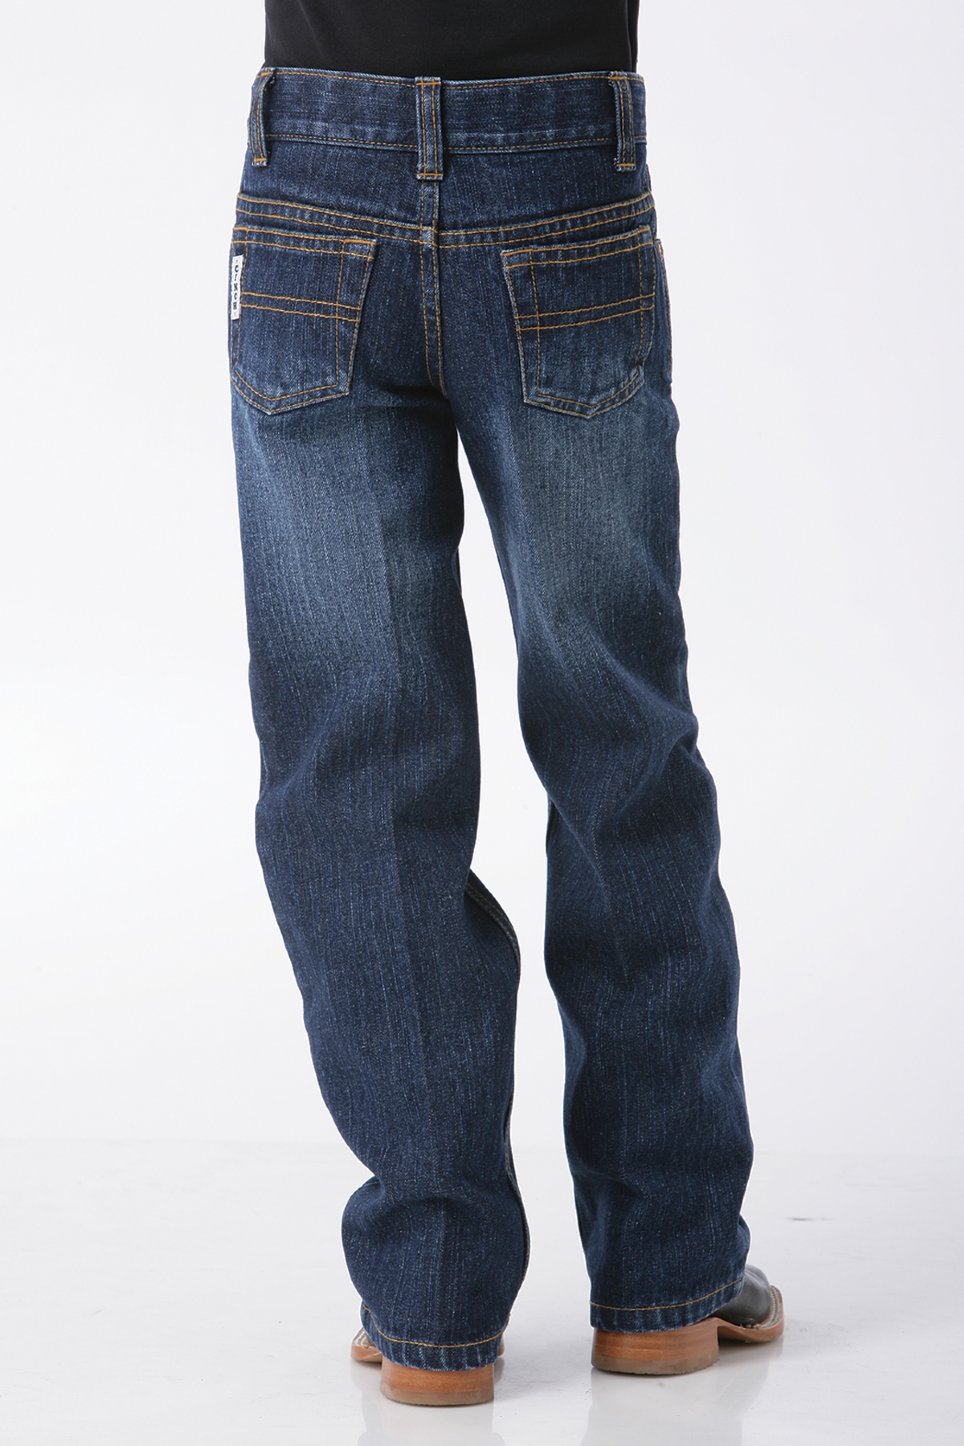 Cinch Boys White Label Slim Fit Jeans - Dark Wash - MB12841002 and MB12820002